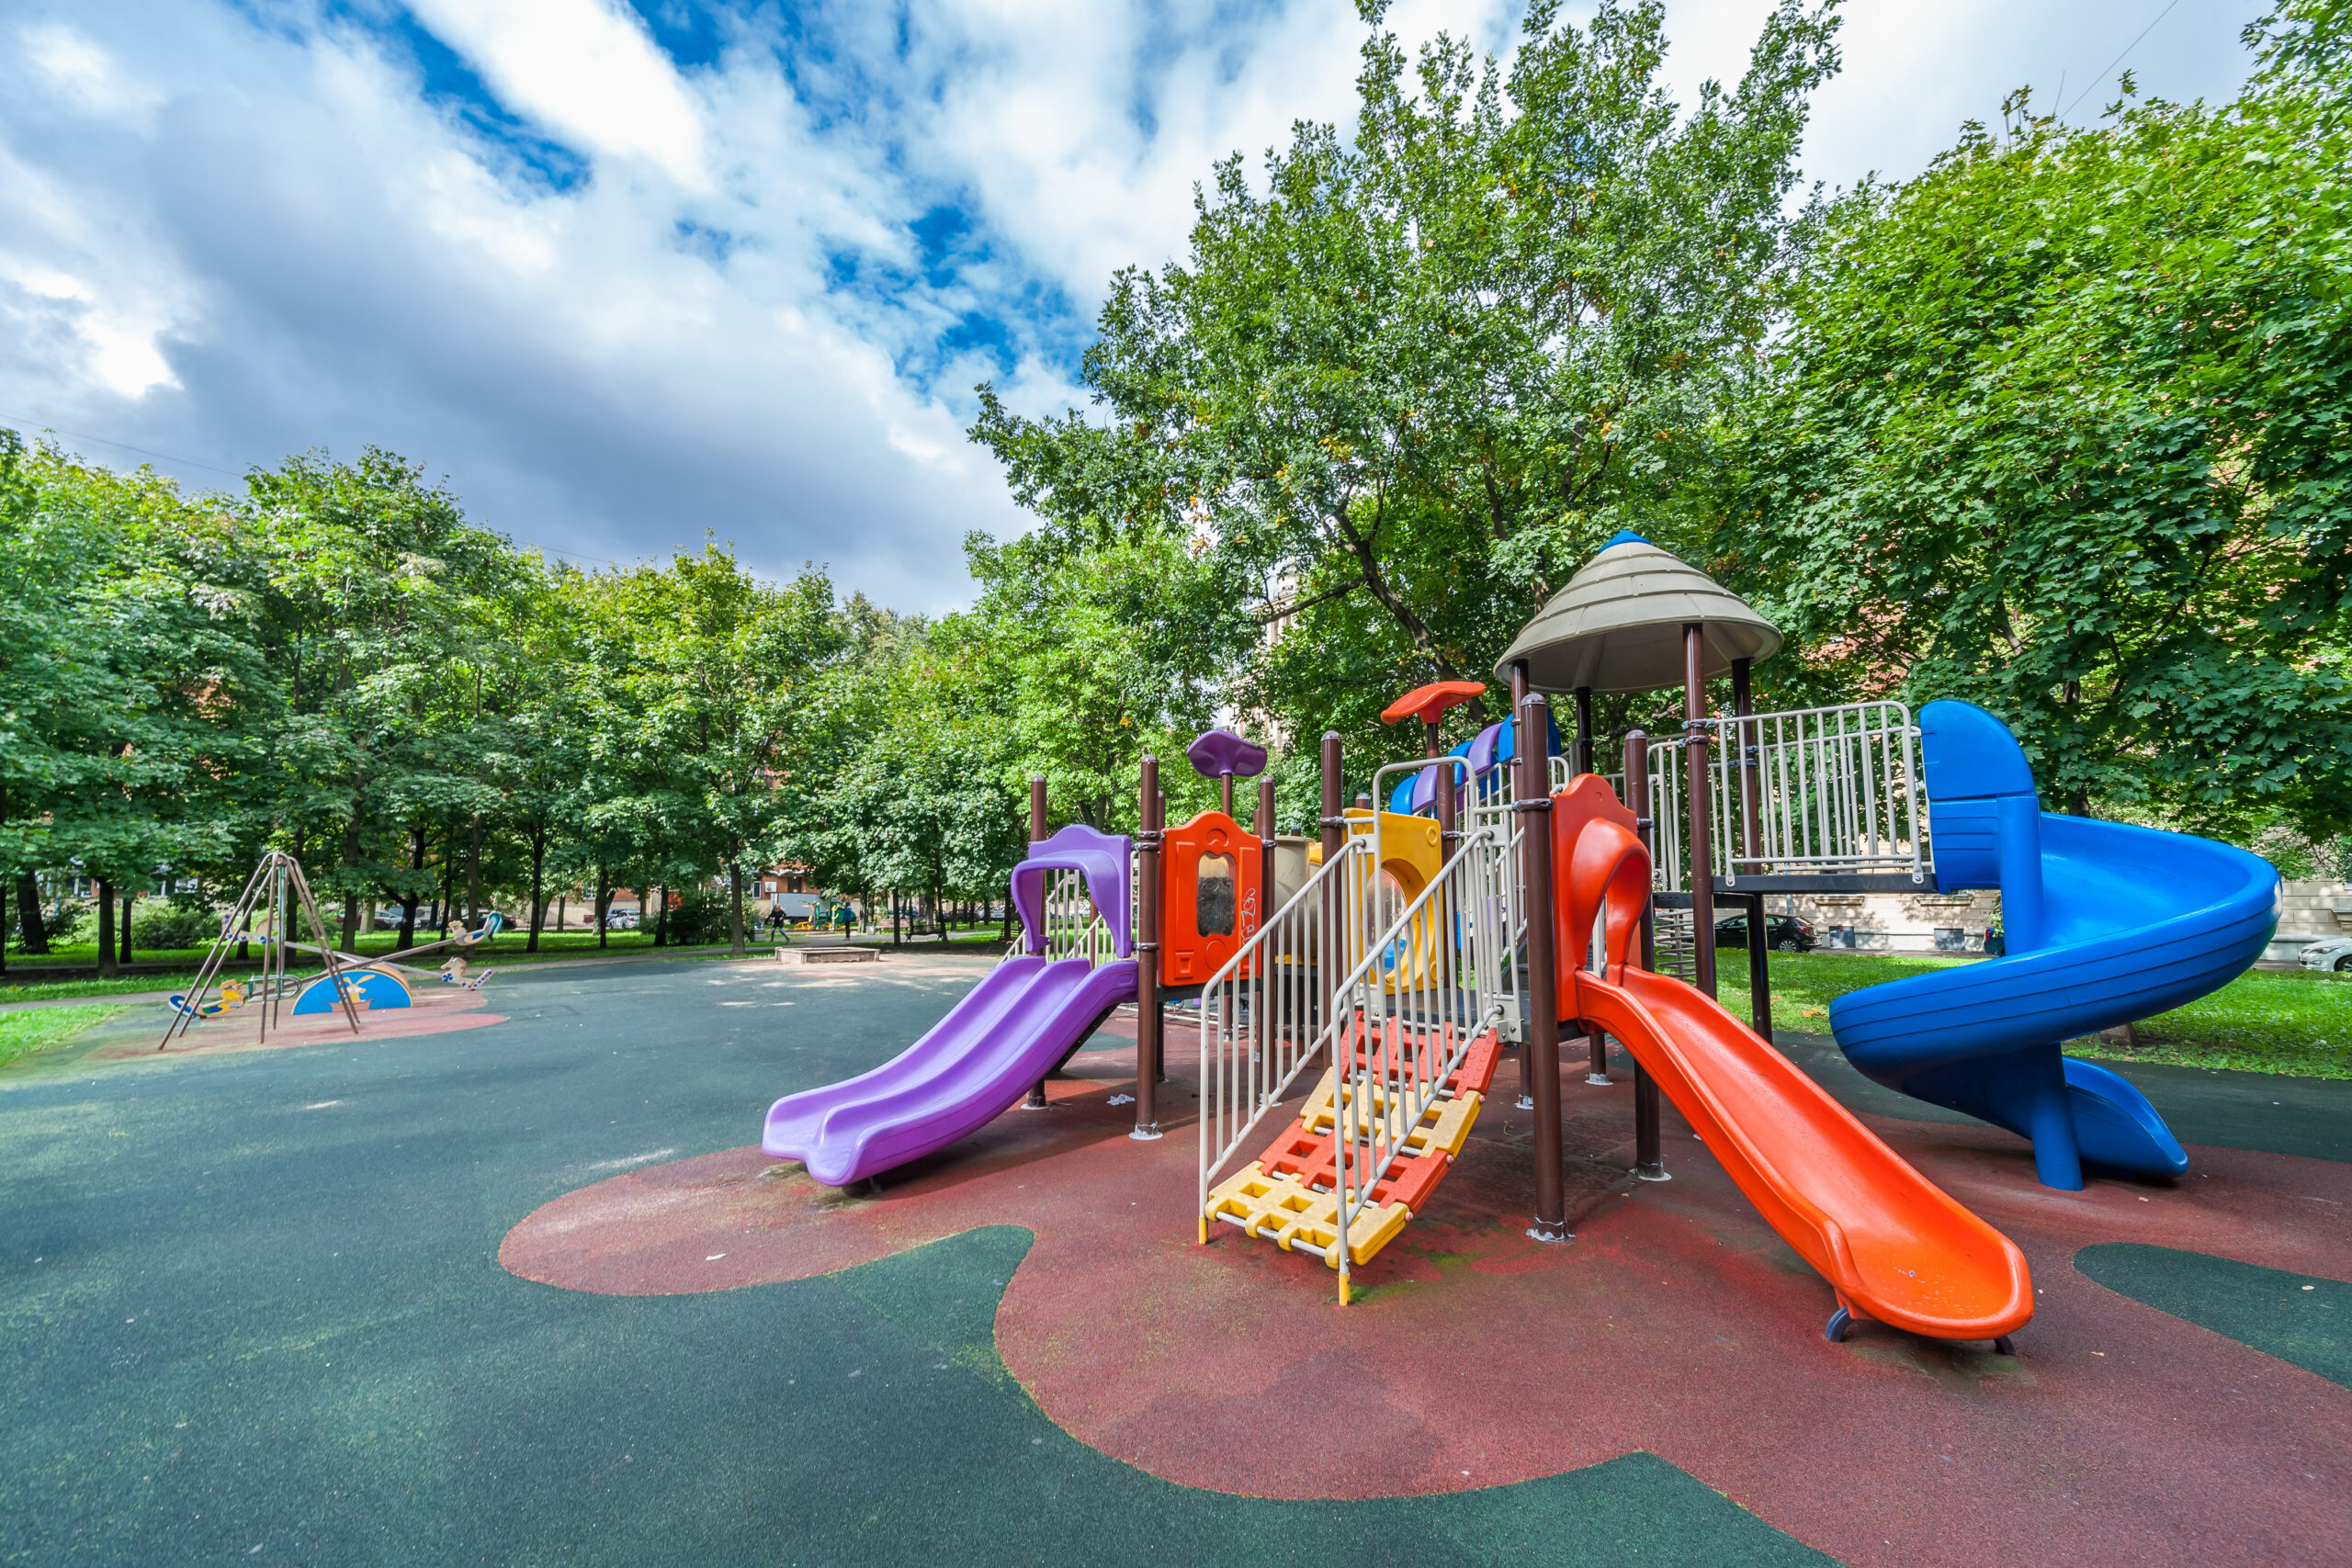 Protecting the Children through Playground Safety Assessment